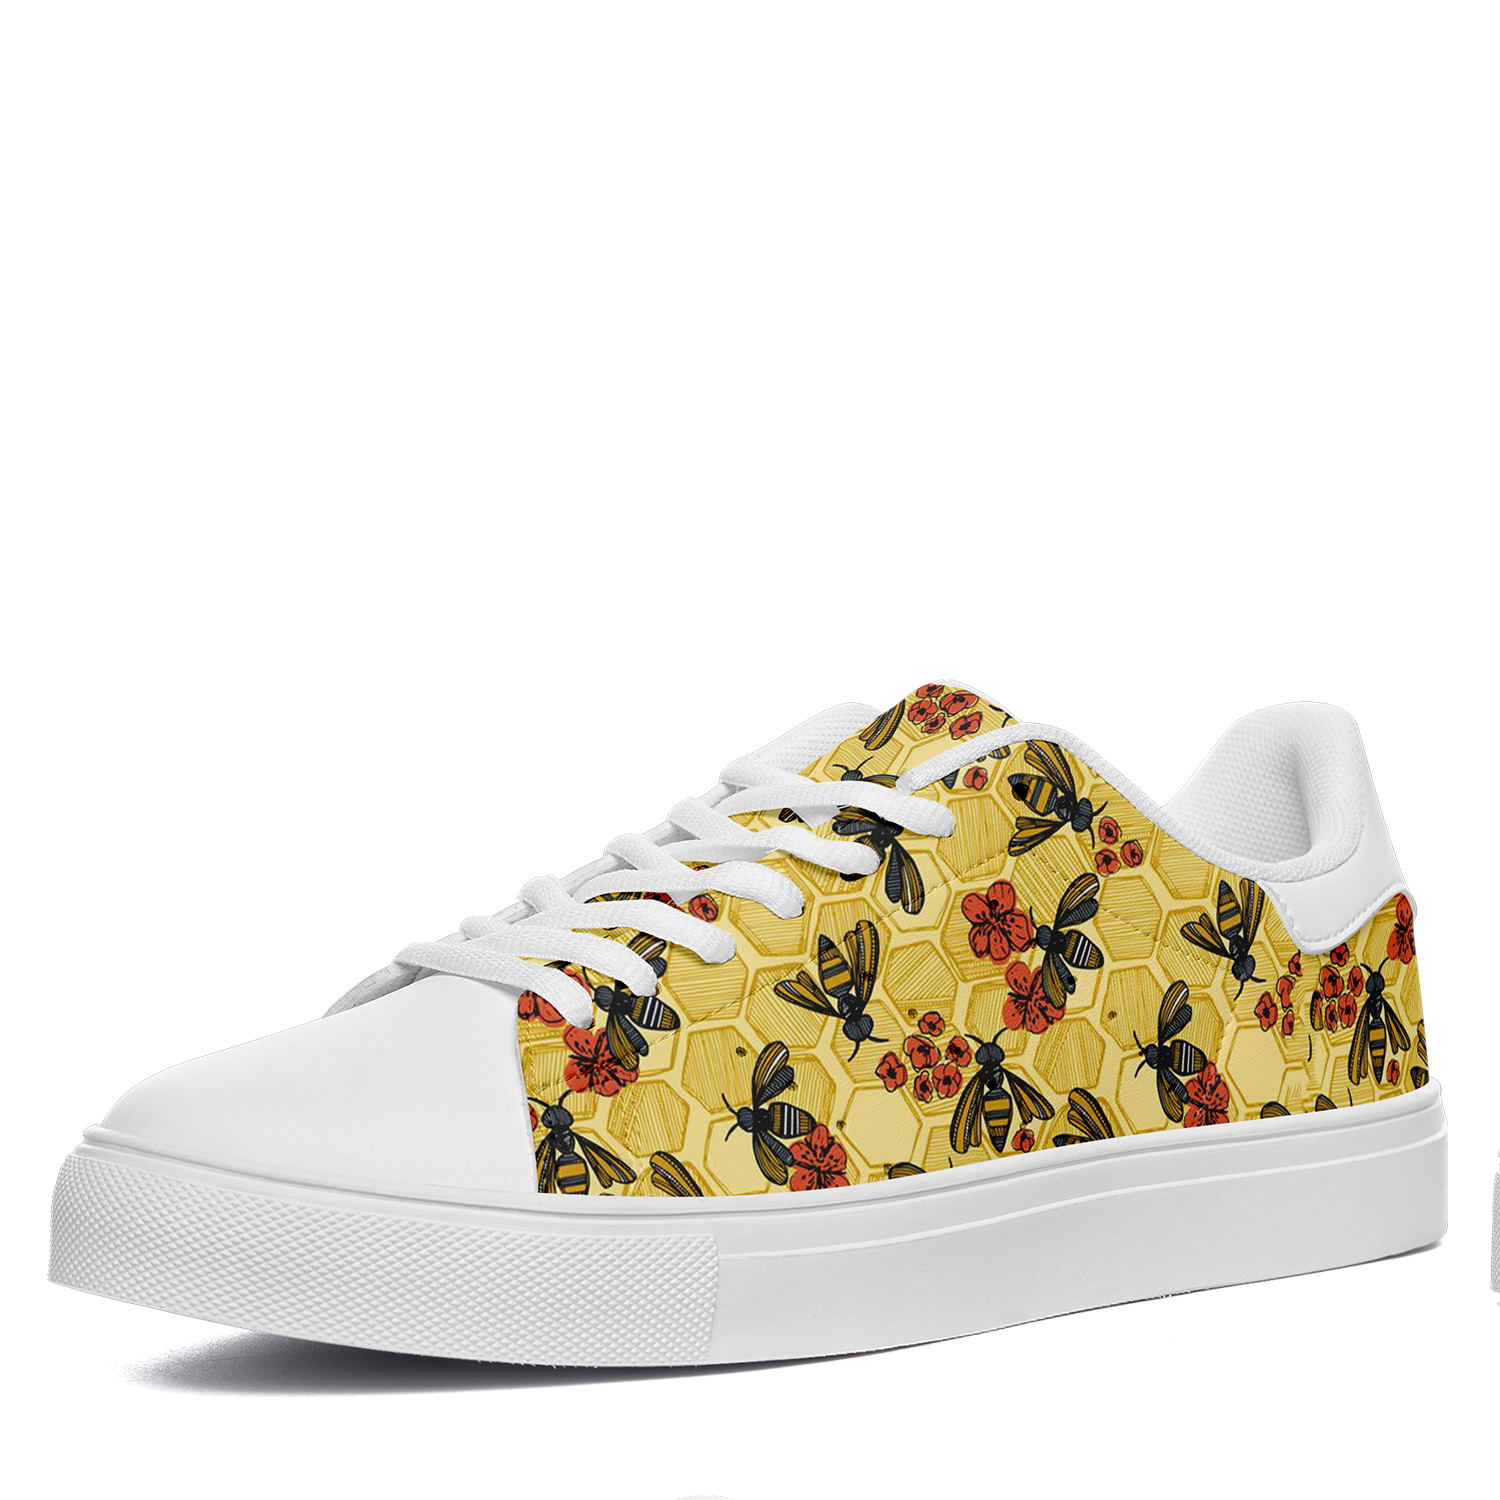 Newest Design Casual Shoes | Customize Printed Logo Picture & Photo On Your Sneakers